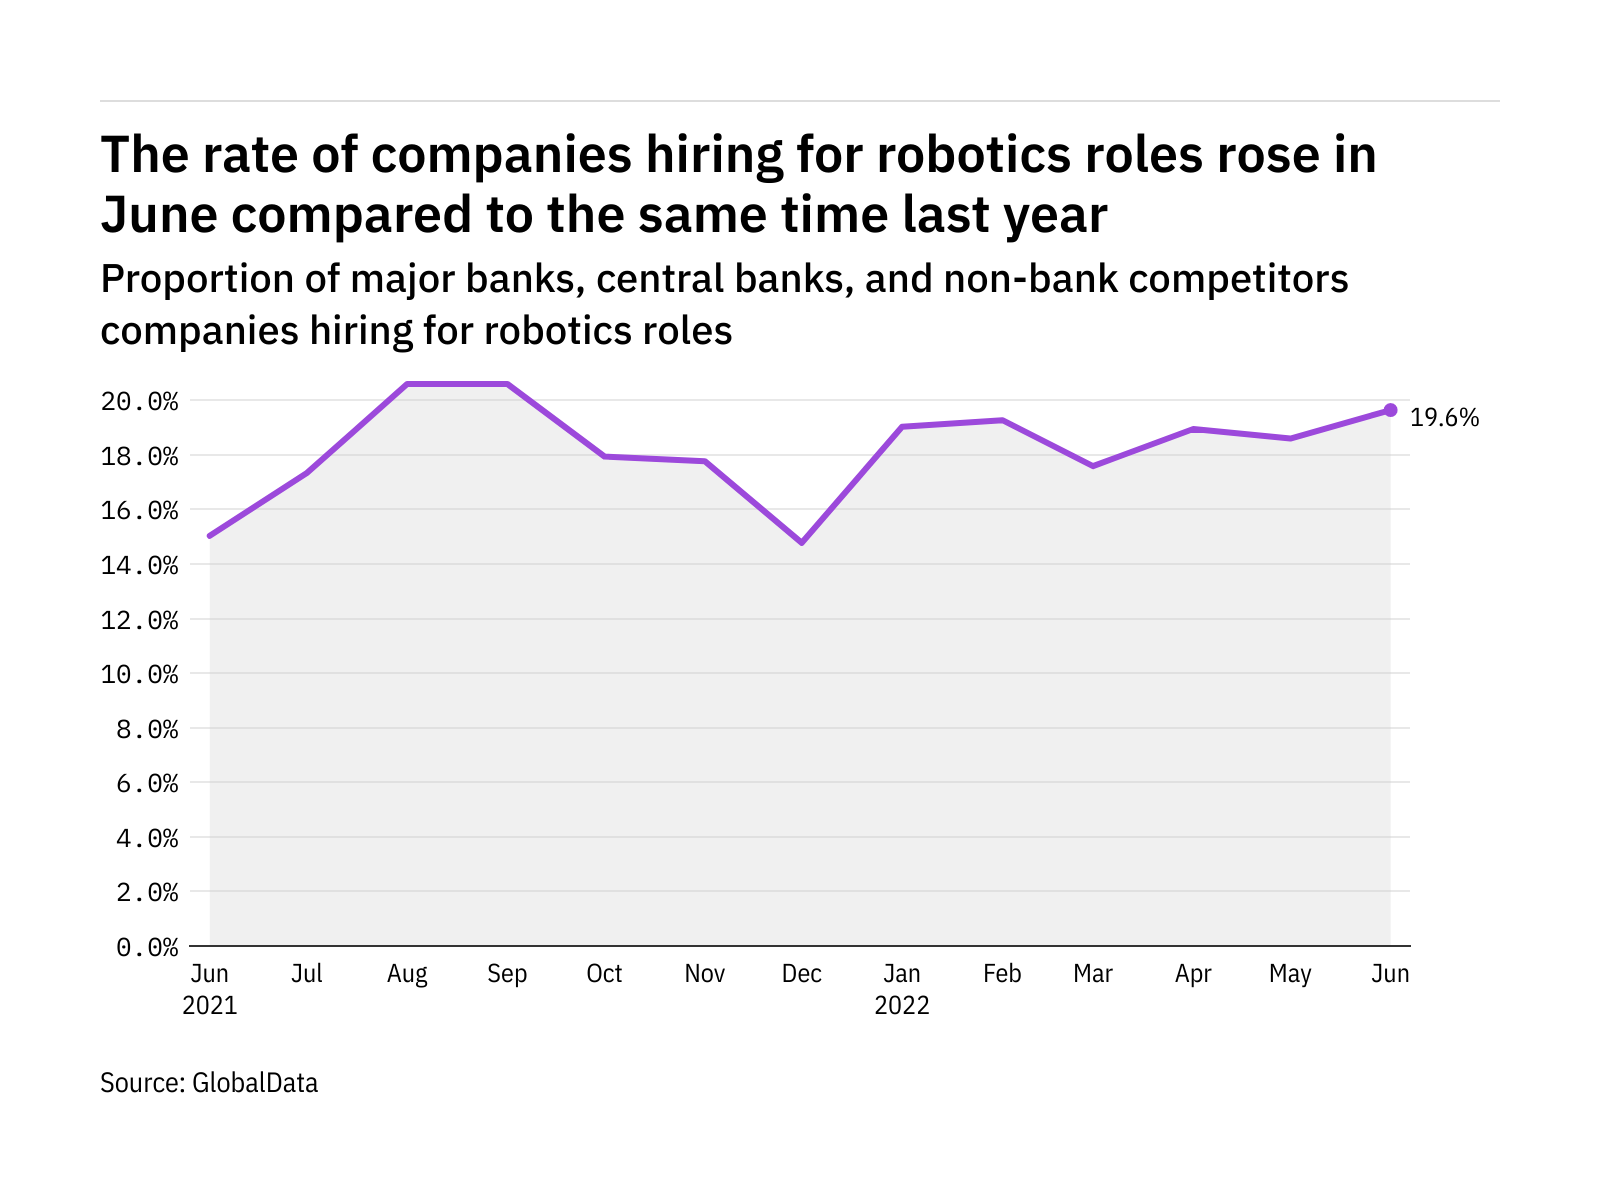 Robotics hiring levels in the retail banking industry rose in June 2022